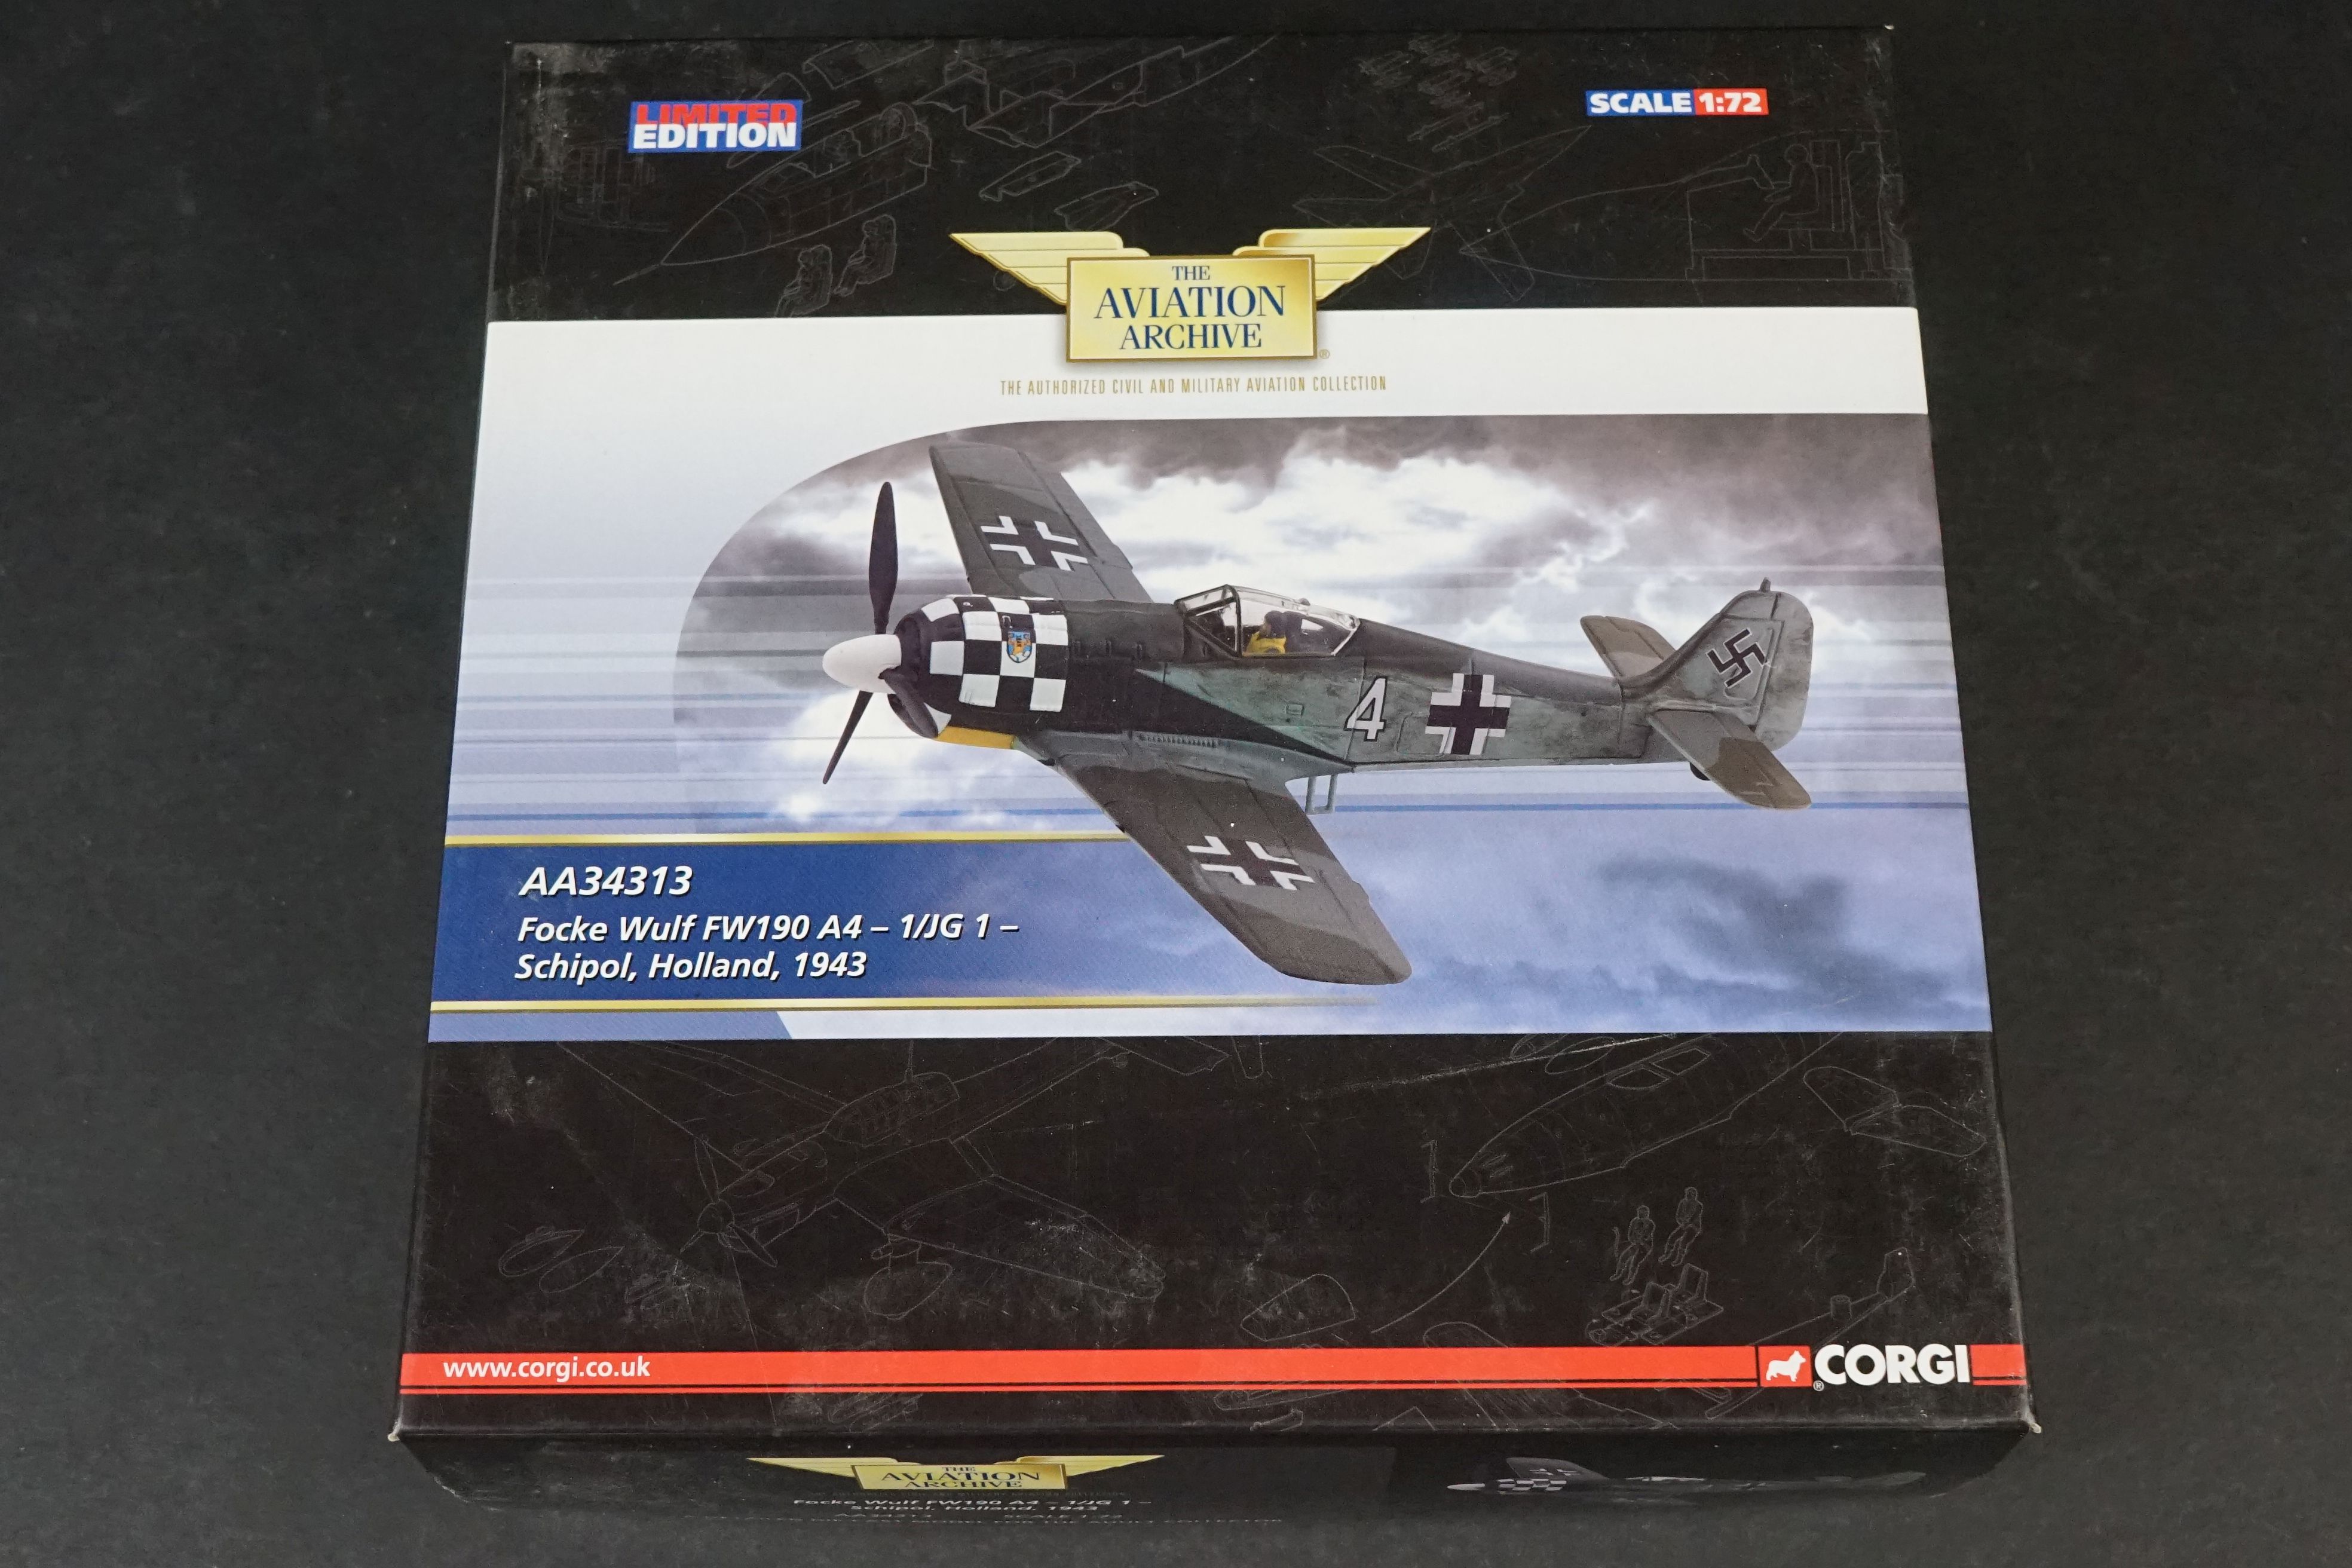 Ten Boxed Corgi Aviation Archive ltd edn 1/72 diecast models to include 2 x AA39702A Hawker - Image 27 of 132